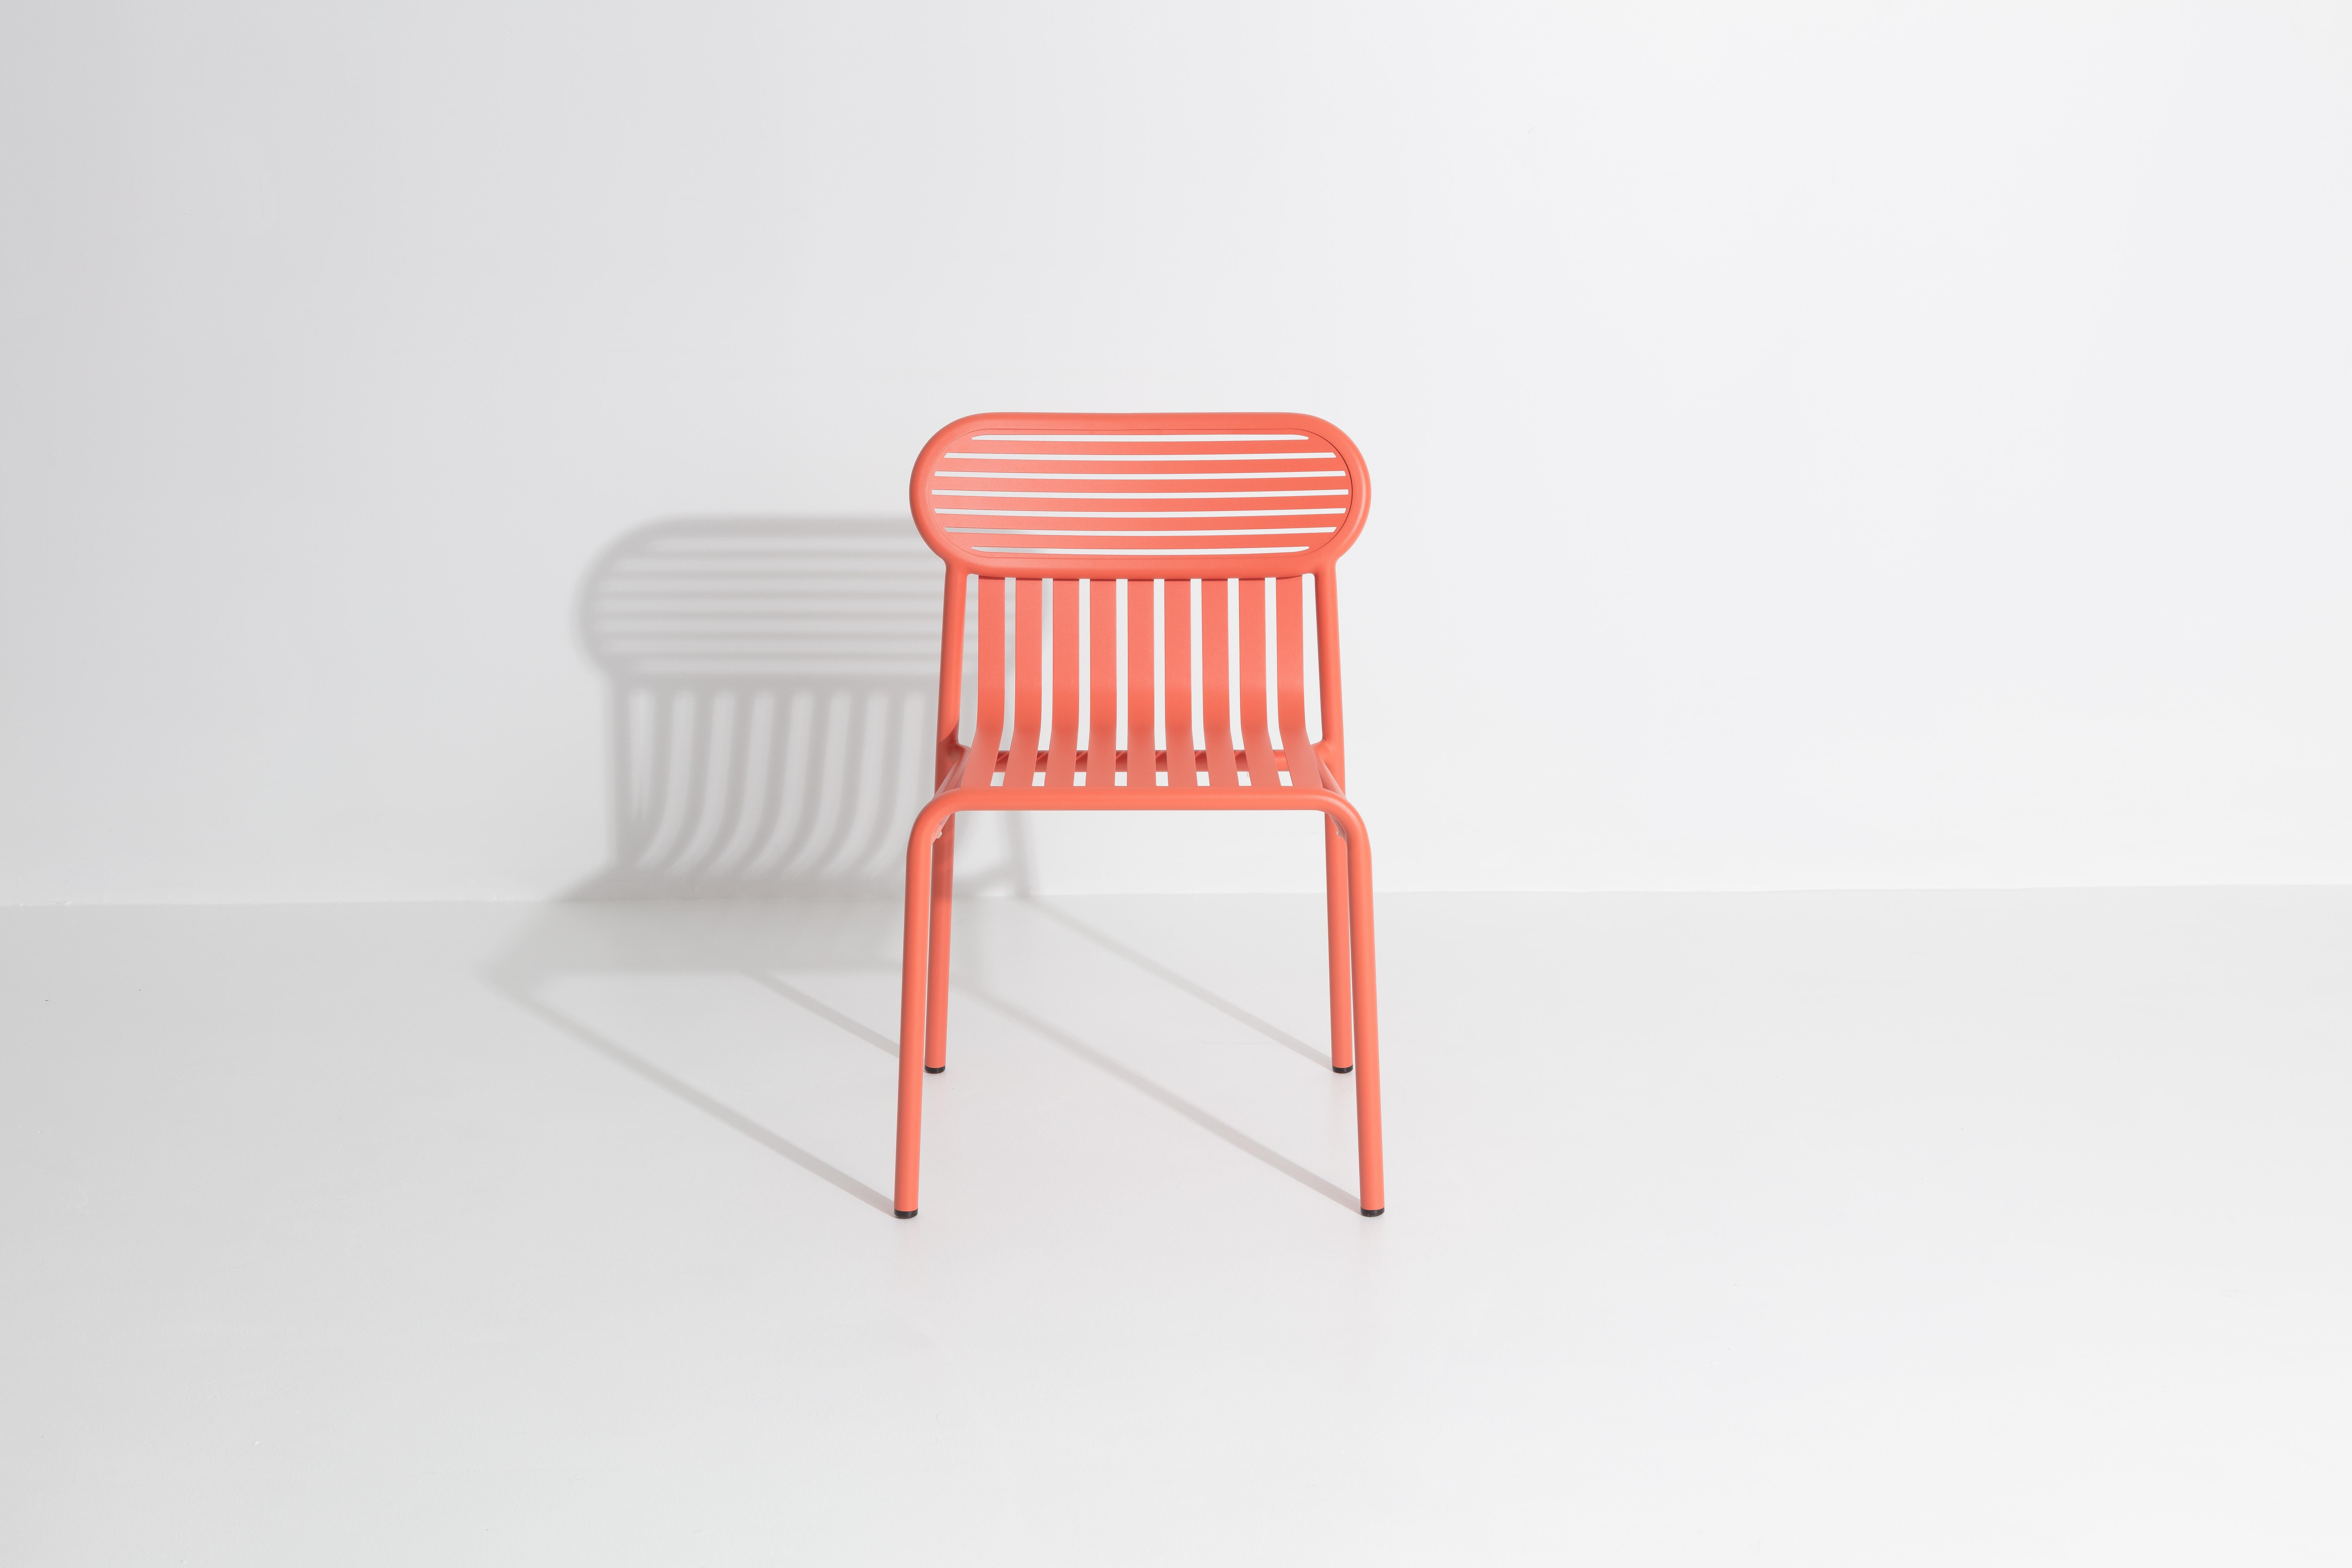 Petite Friture Week-End Chair in Coral Aluminium by Studio BrichetZiegler, 2017

The week-end collection is a full range of outdoor furniture, in aluminium grained epoxy paint, matt finish, that includes 18 functions and 8 colours for the retail